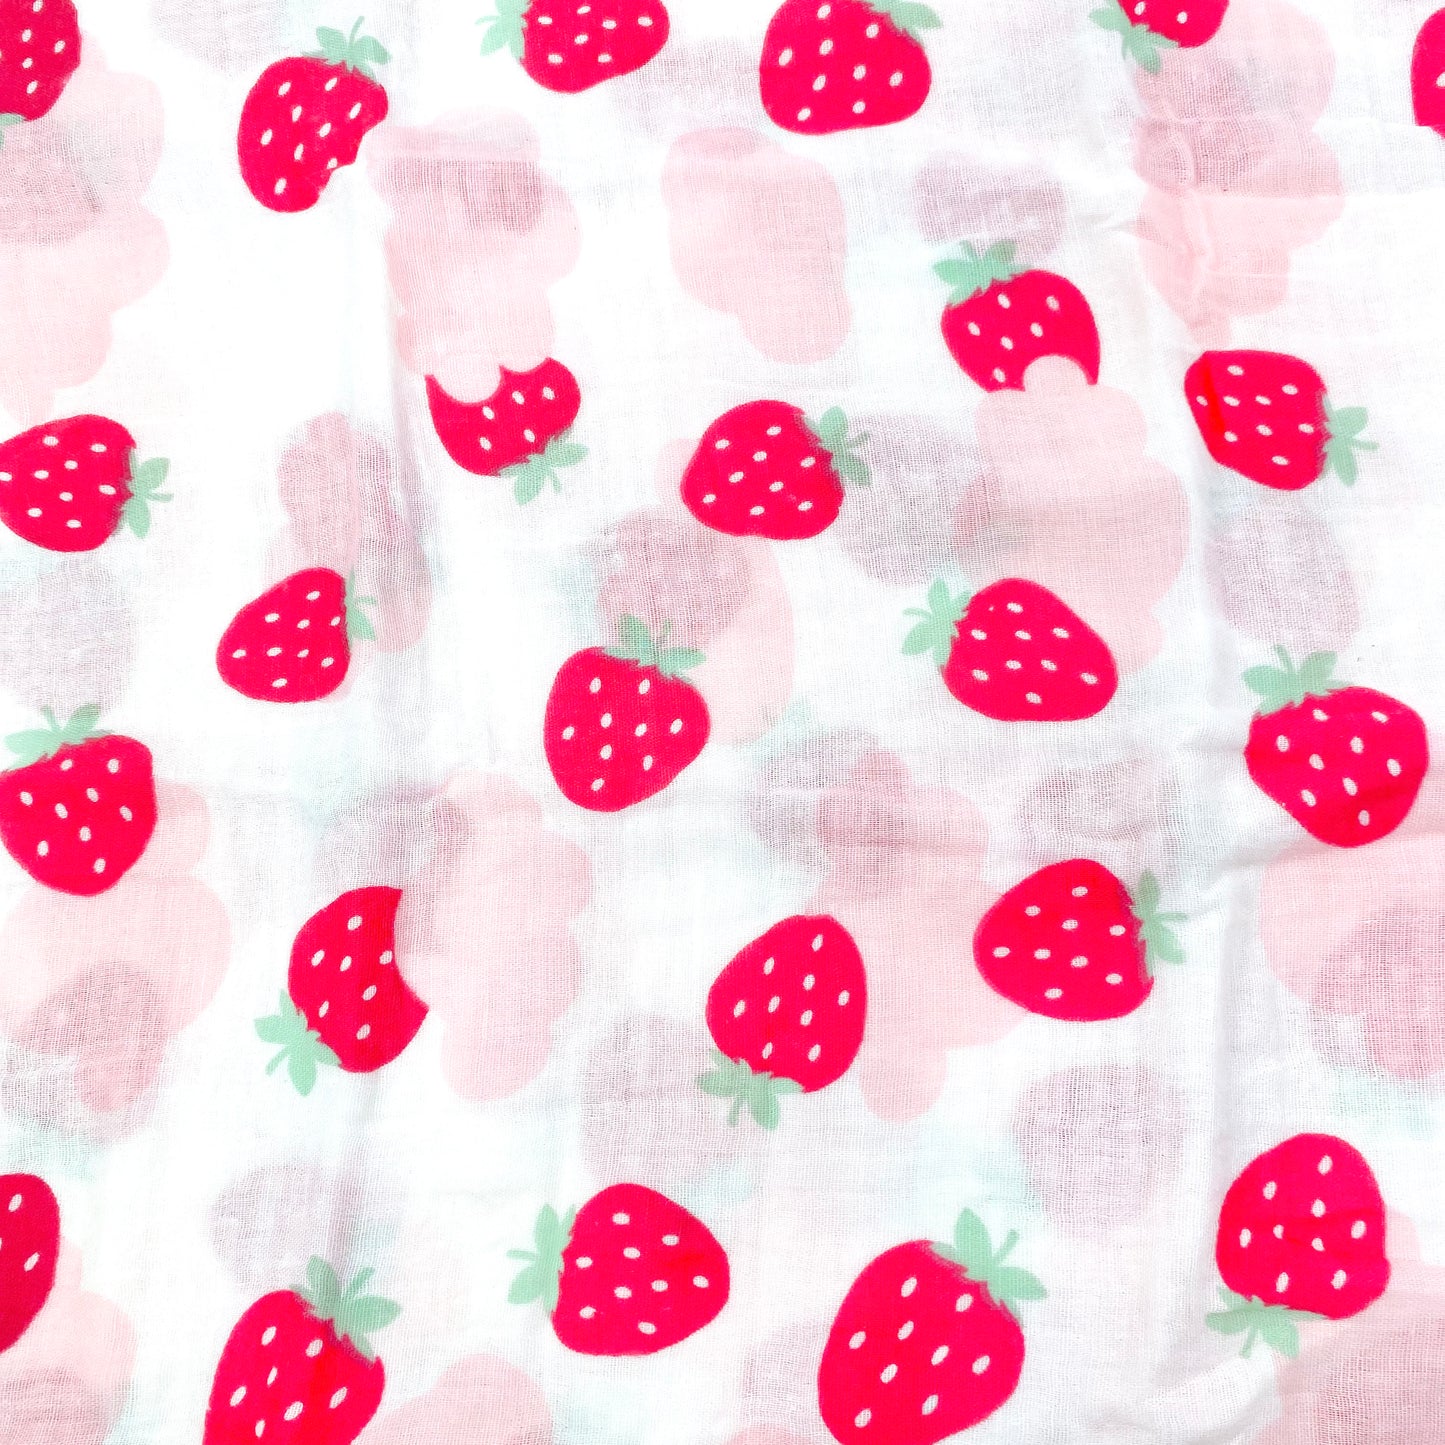 A close up view of the pink strawberry pattern of a muslin baby blanket.